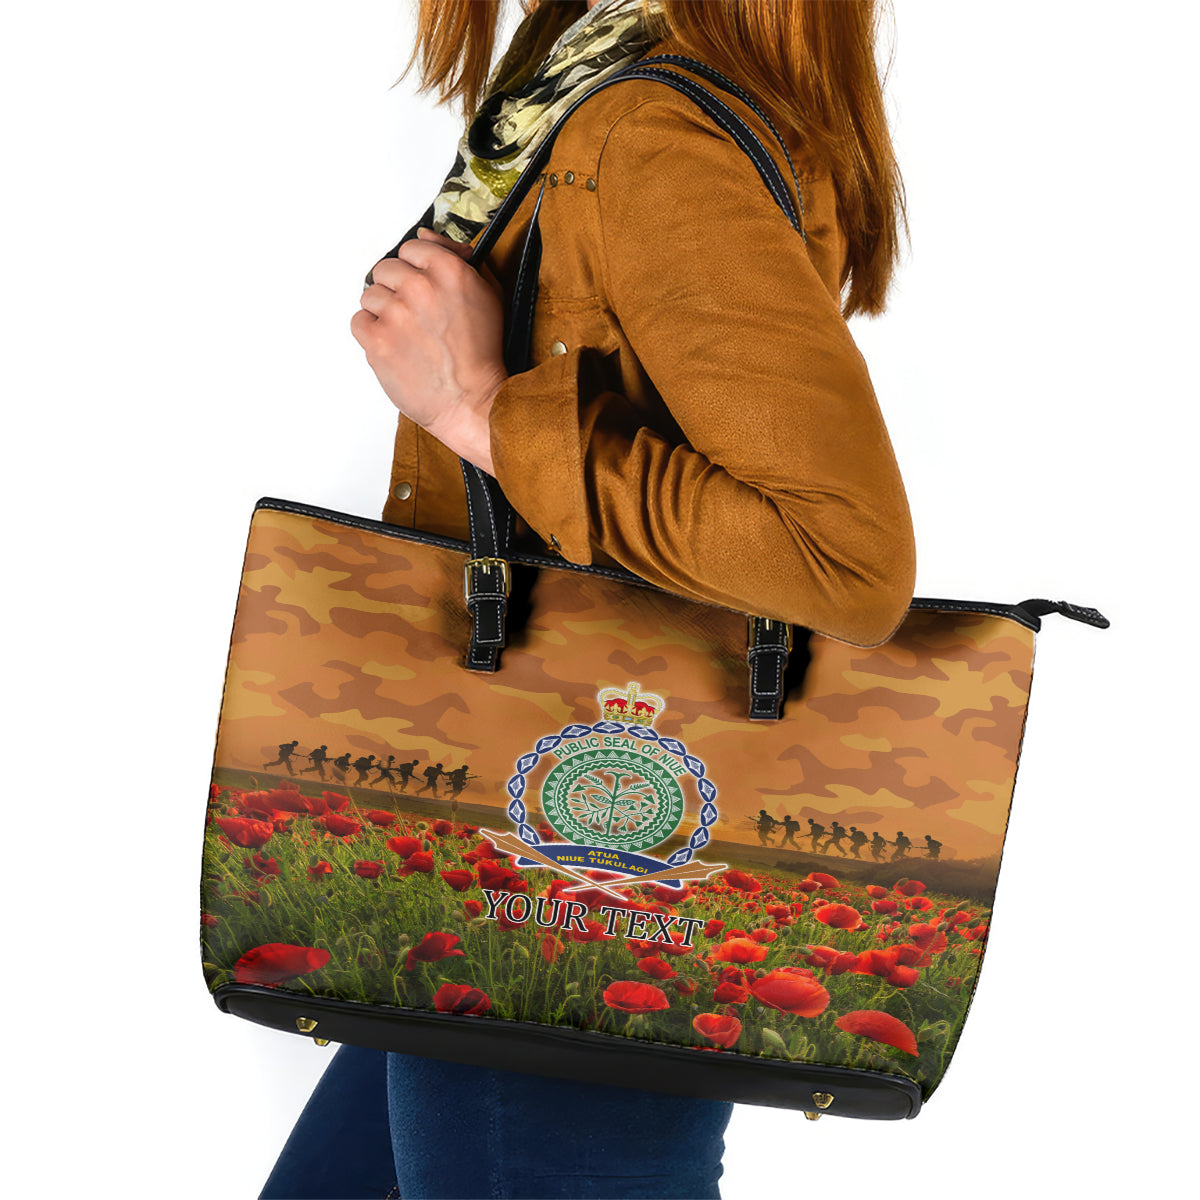 Niue ANZAC Day Personalised Leather Tote Bag with Poppy Field LT9 Art - Polynesian Pride